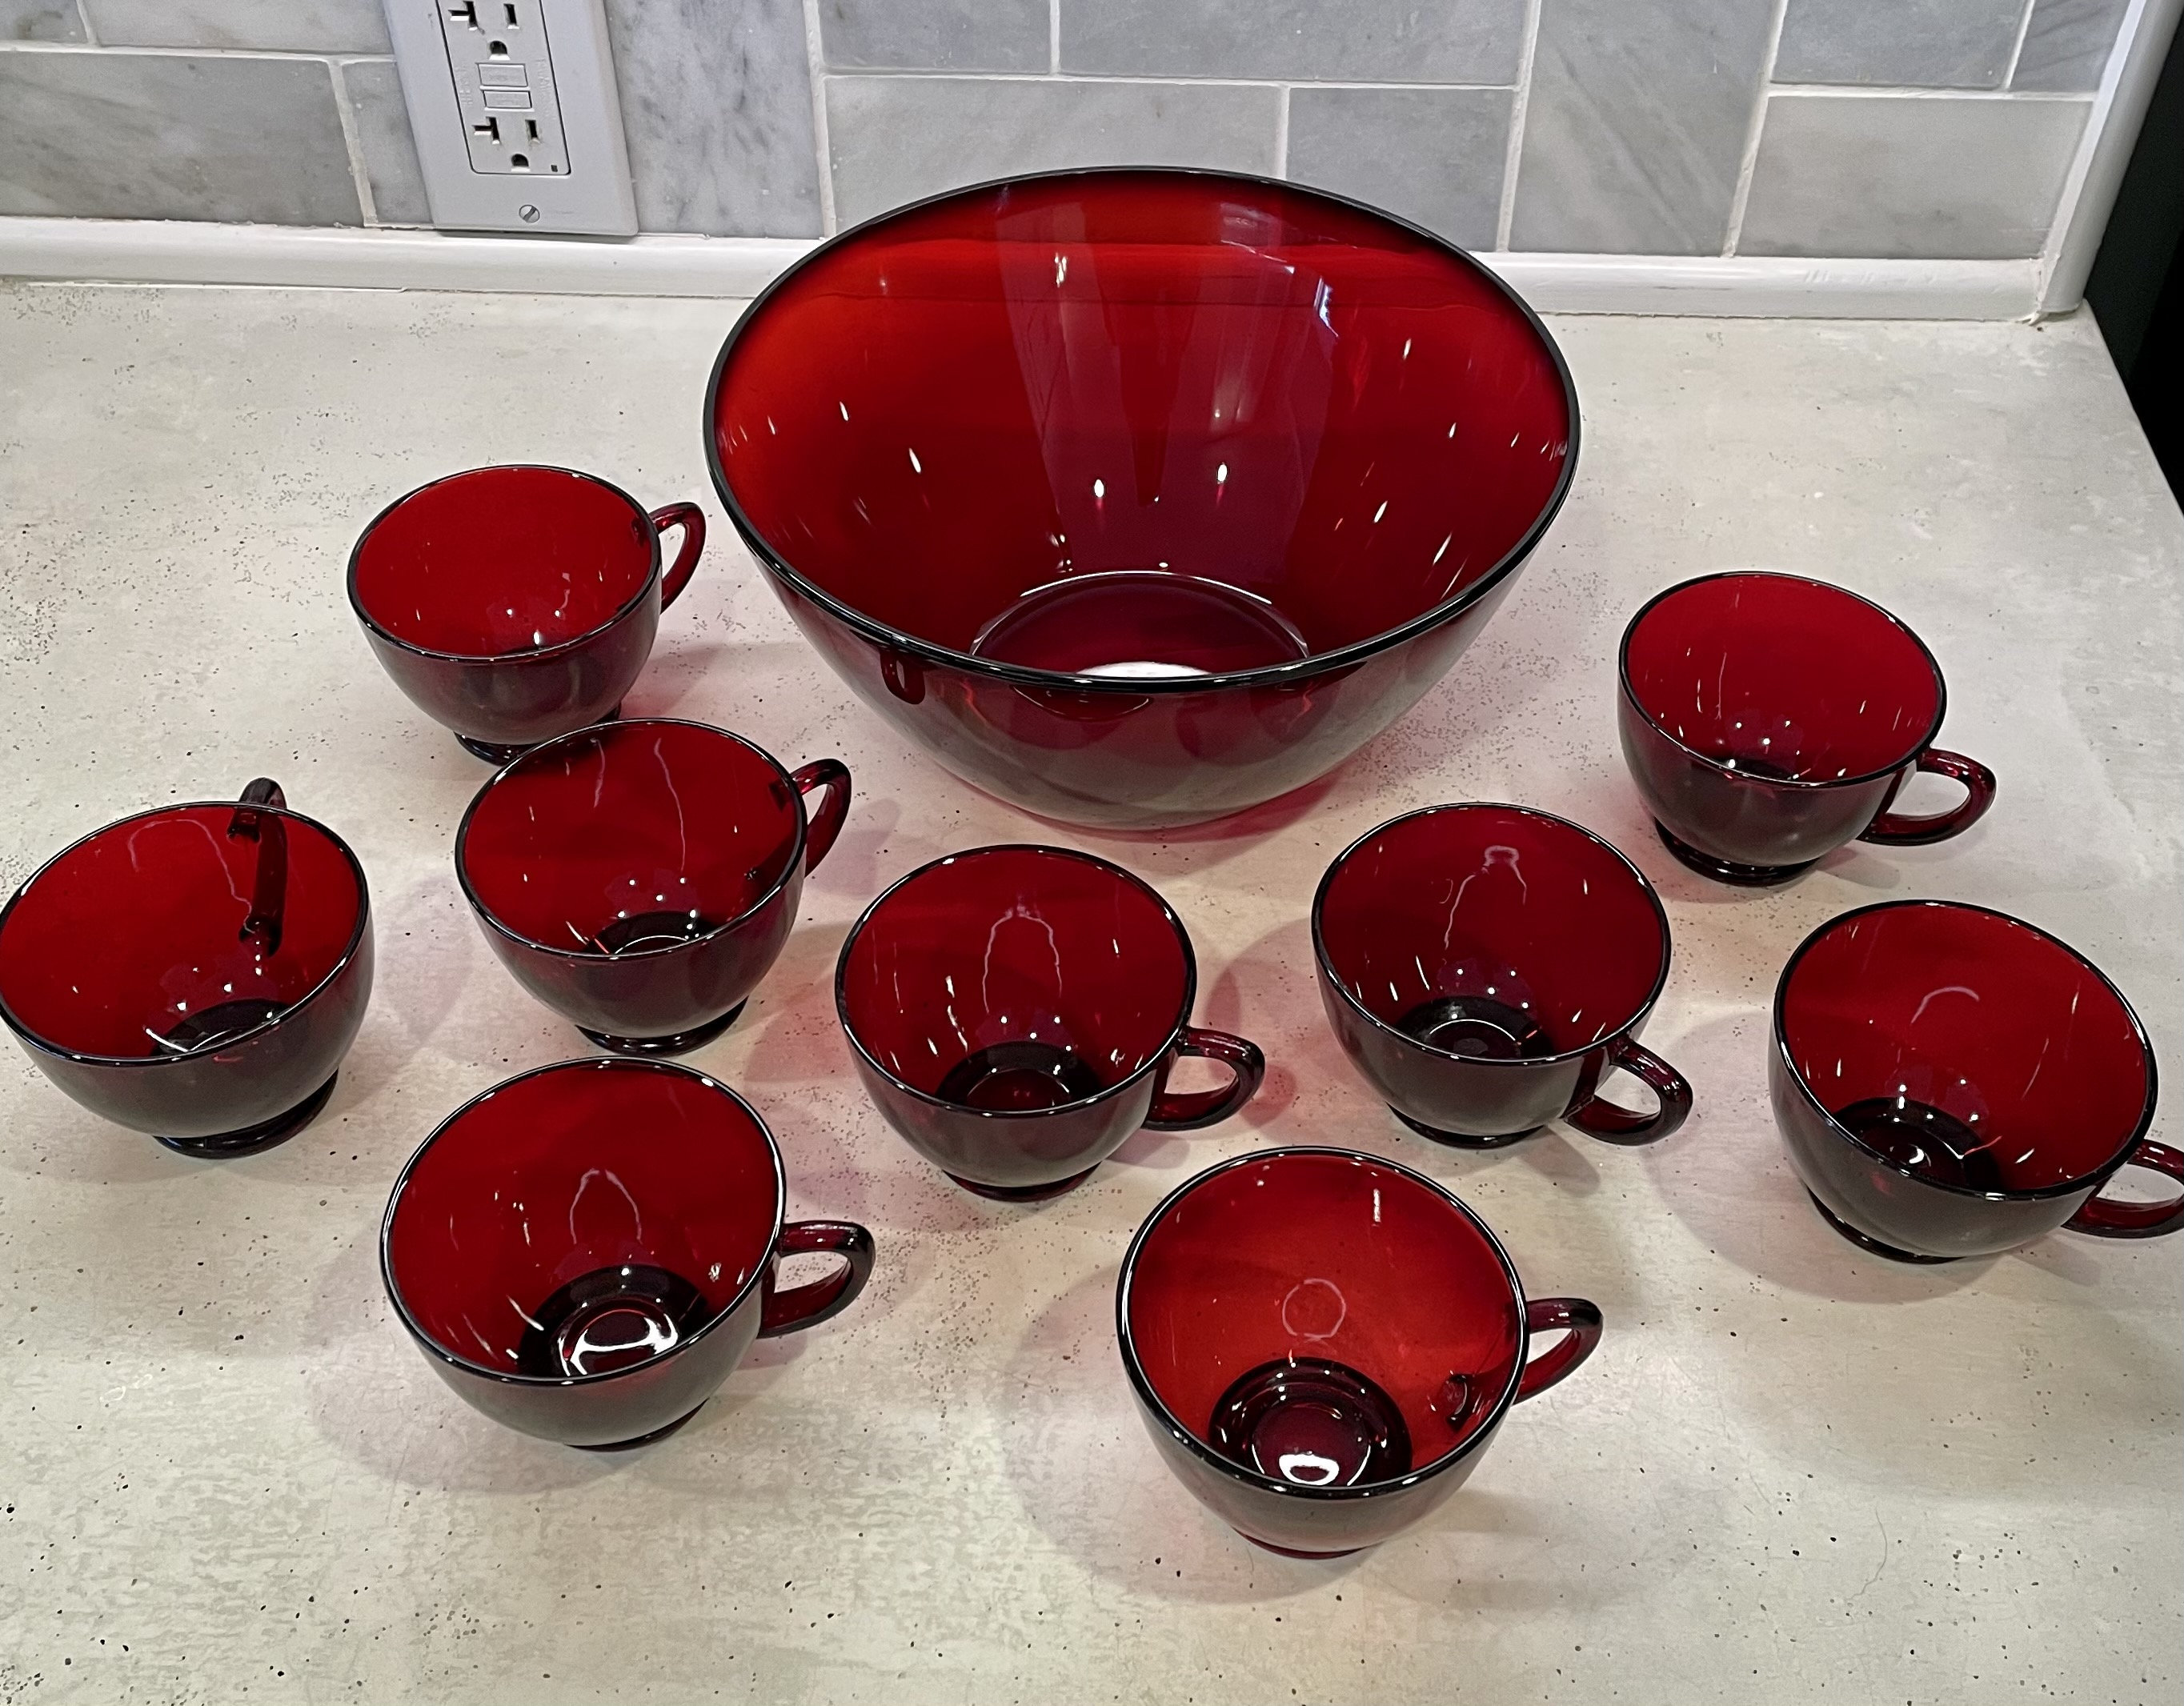 Vintage Ruby Red Punch Bowl Set with 8 Glasses Cristal | Etsy